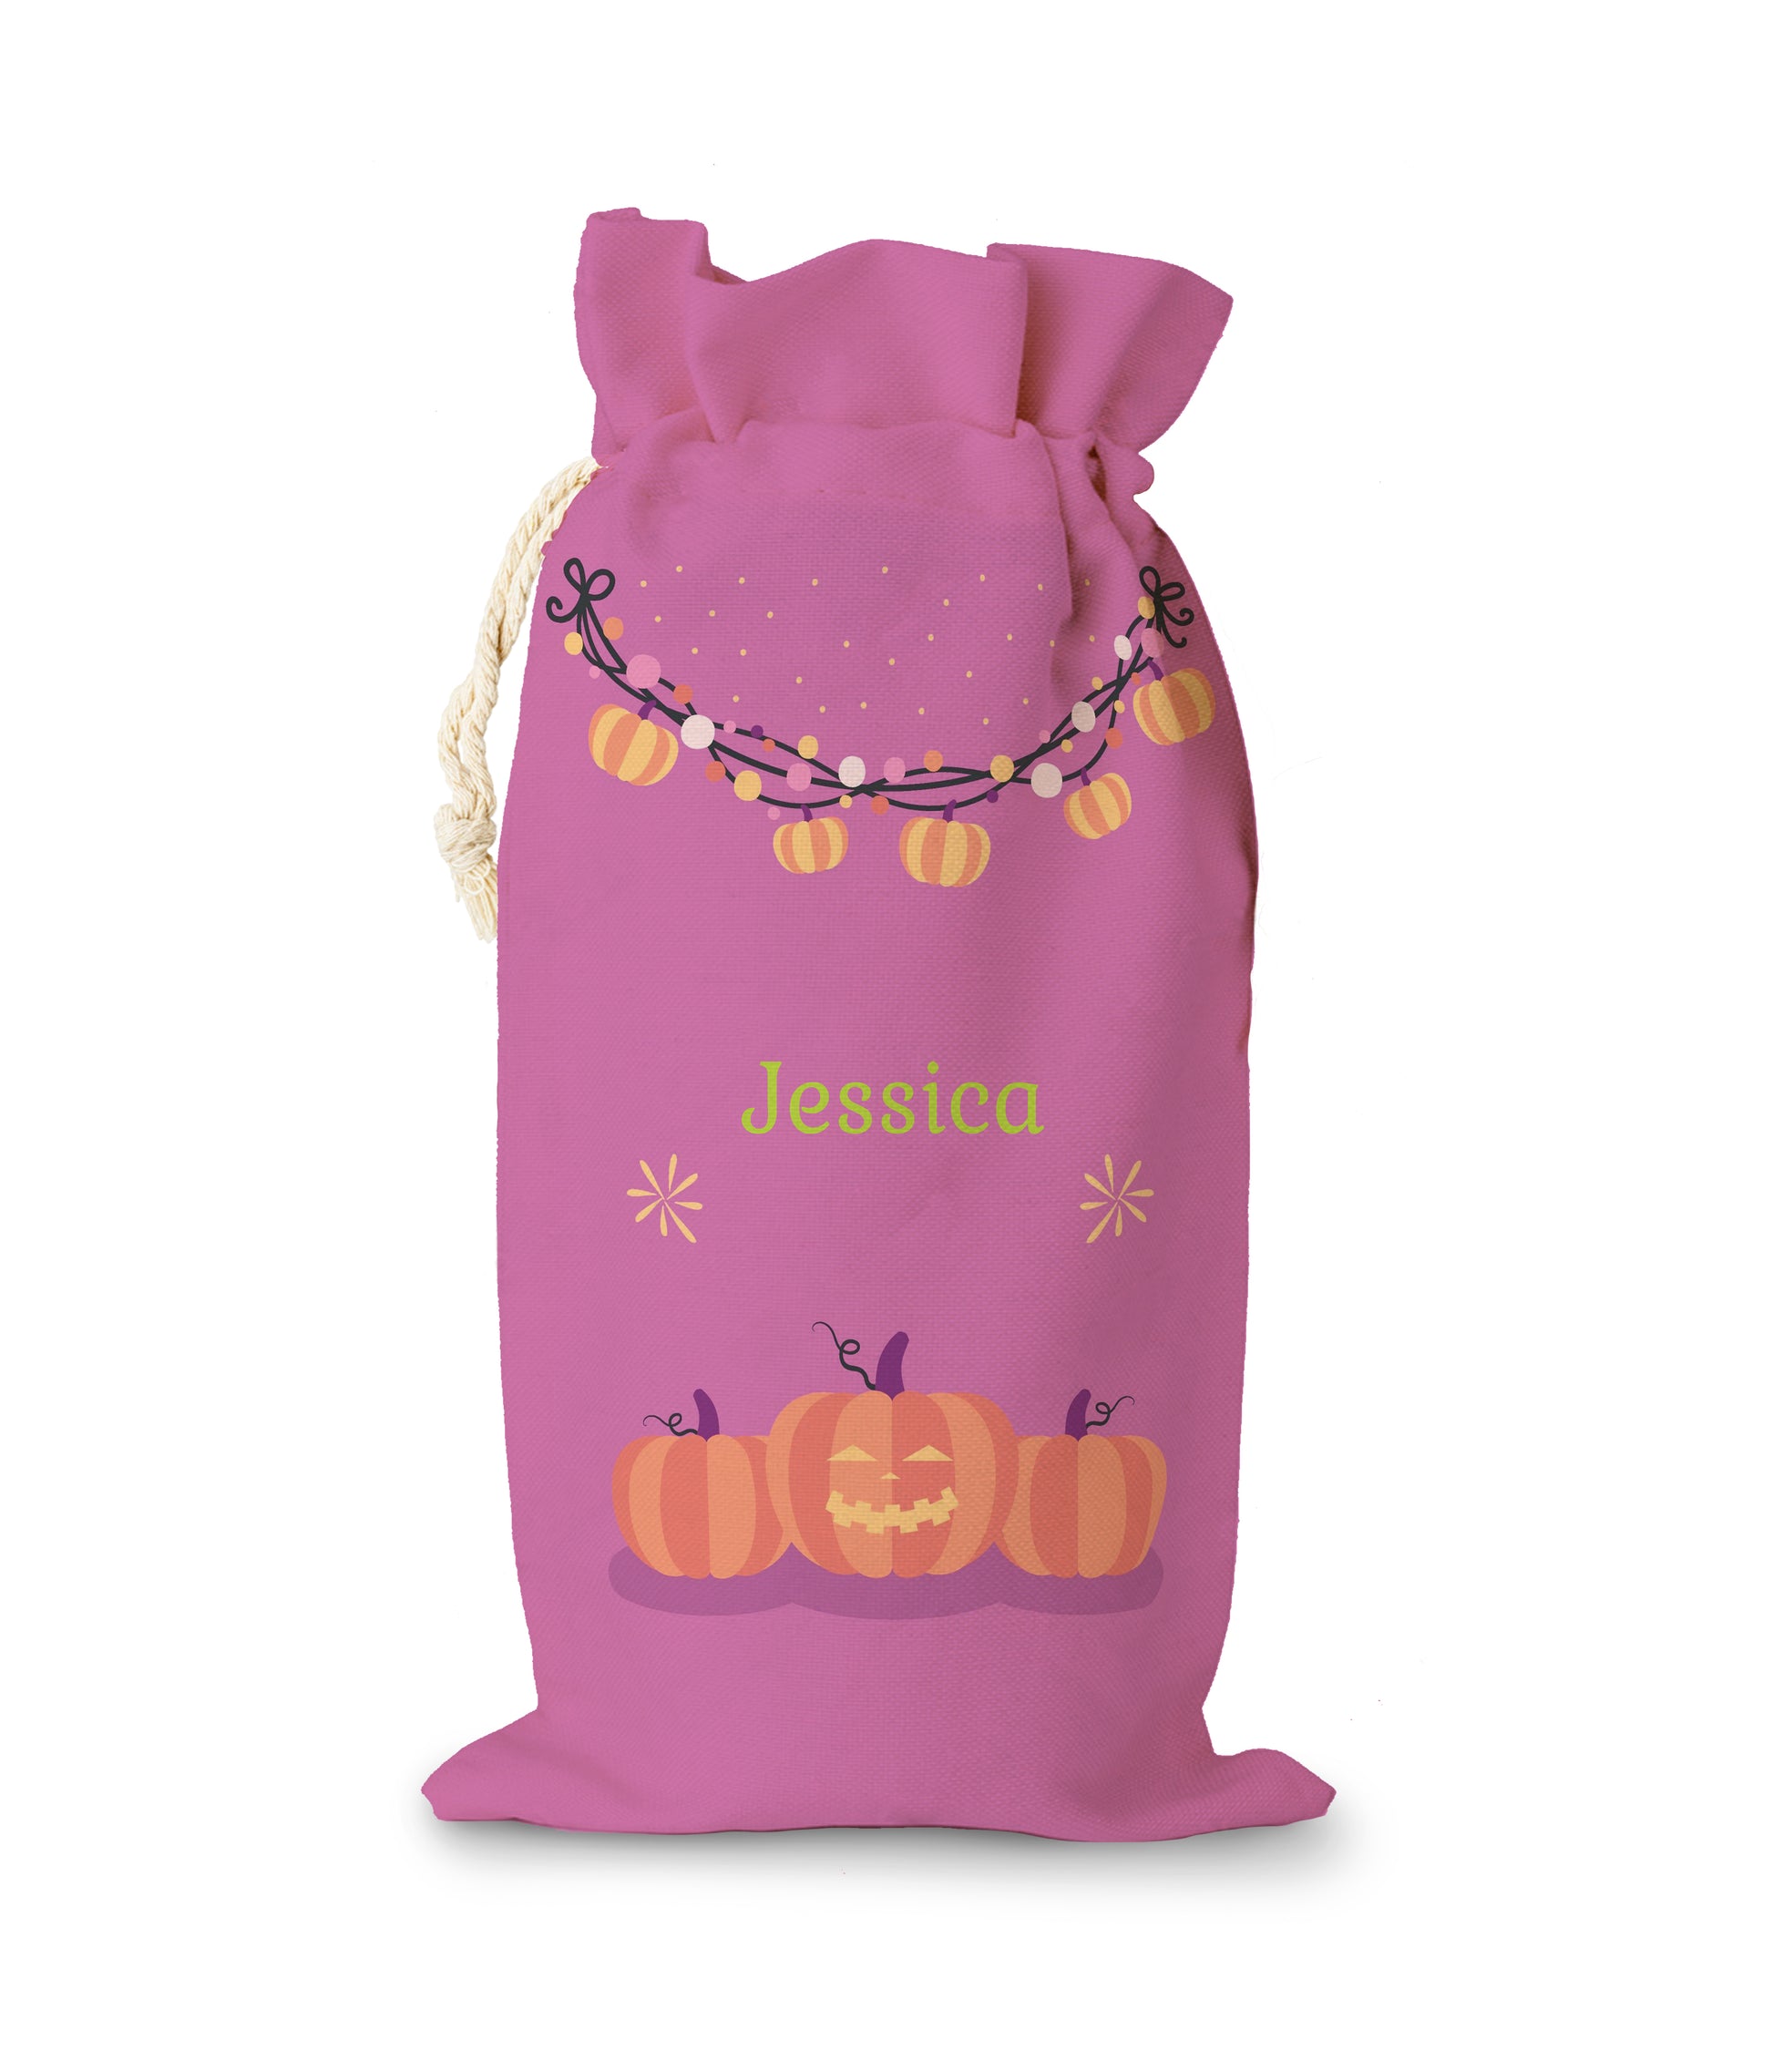 Halloween Candy Sack With Pumpkin Face, Name on sack "Jessica".